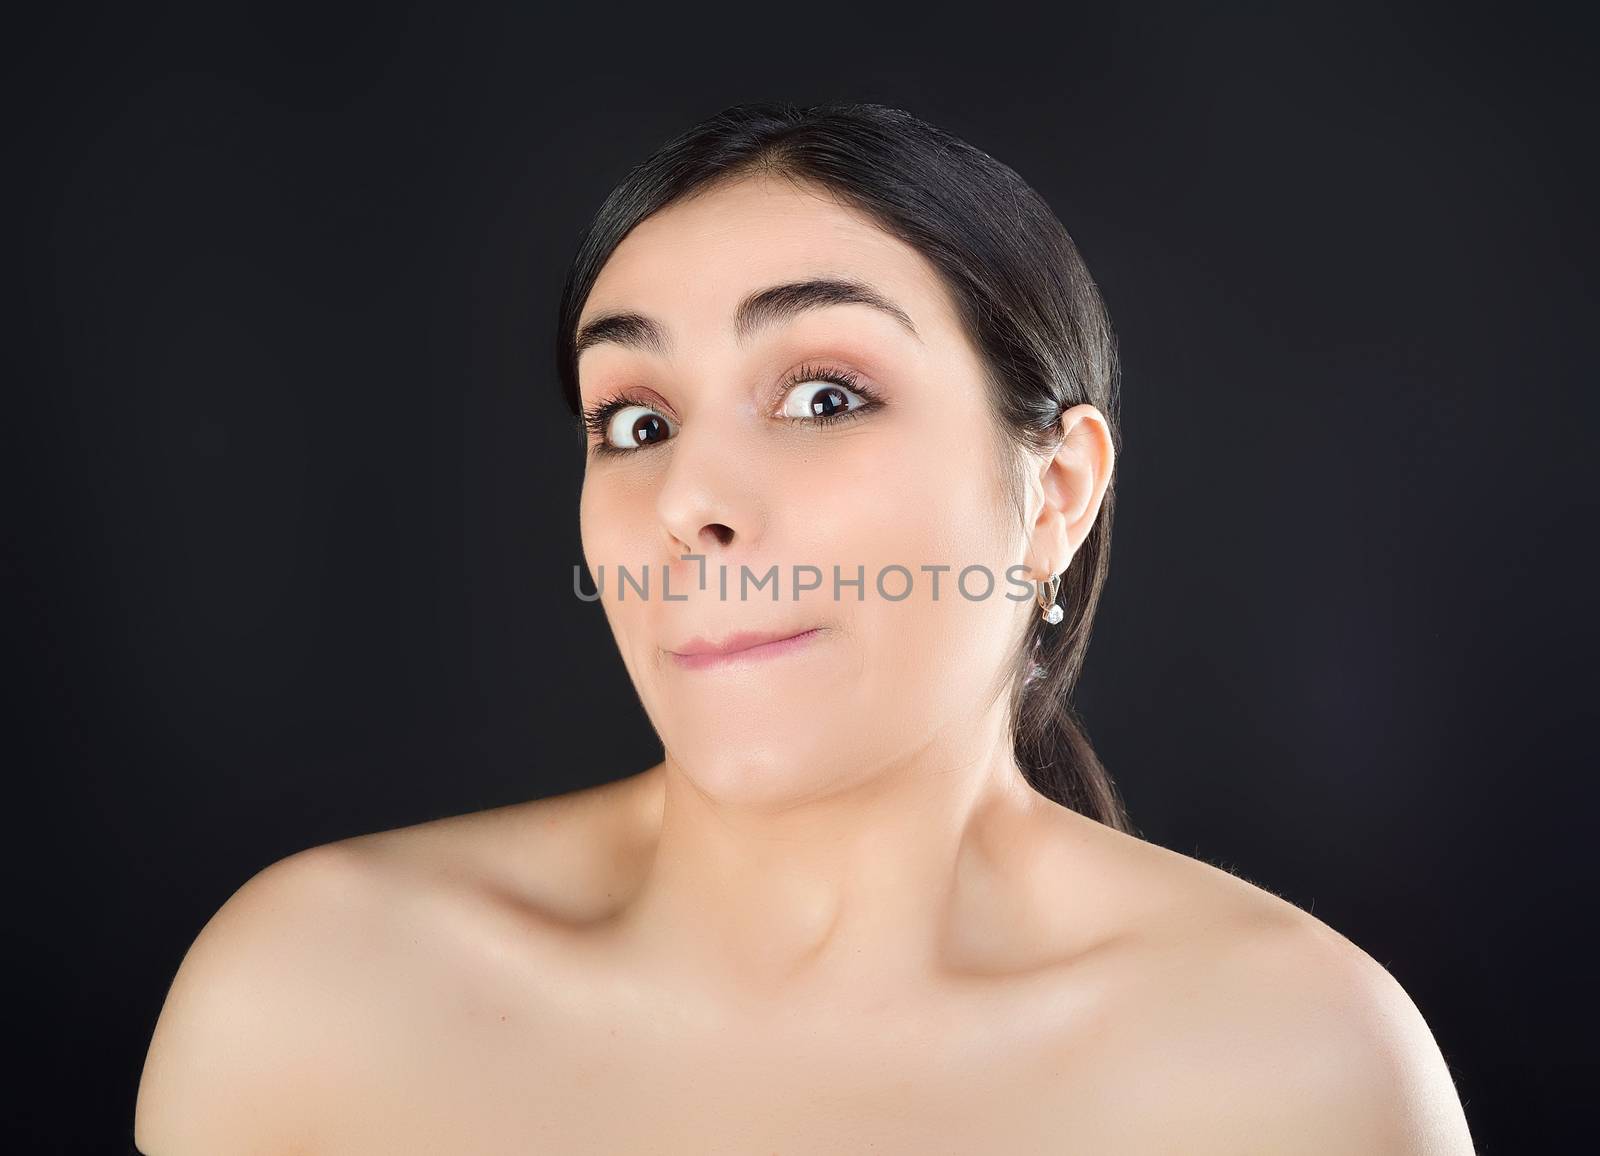 Beauty portrait of a girl with bare shoulders who is surprised at the camera. Studio shot on black background